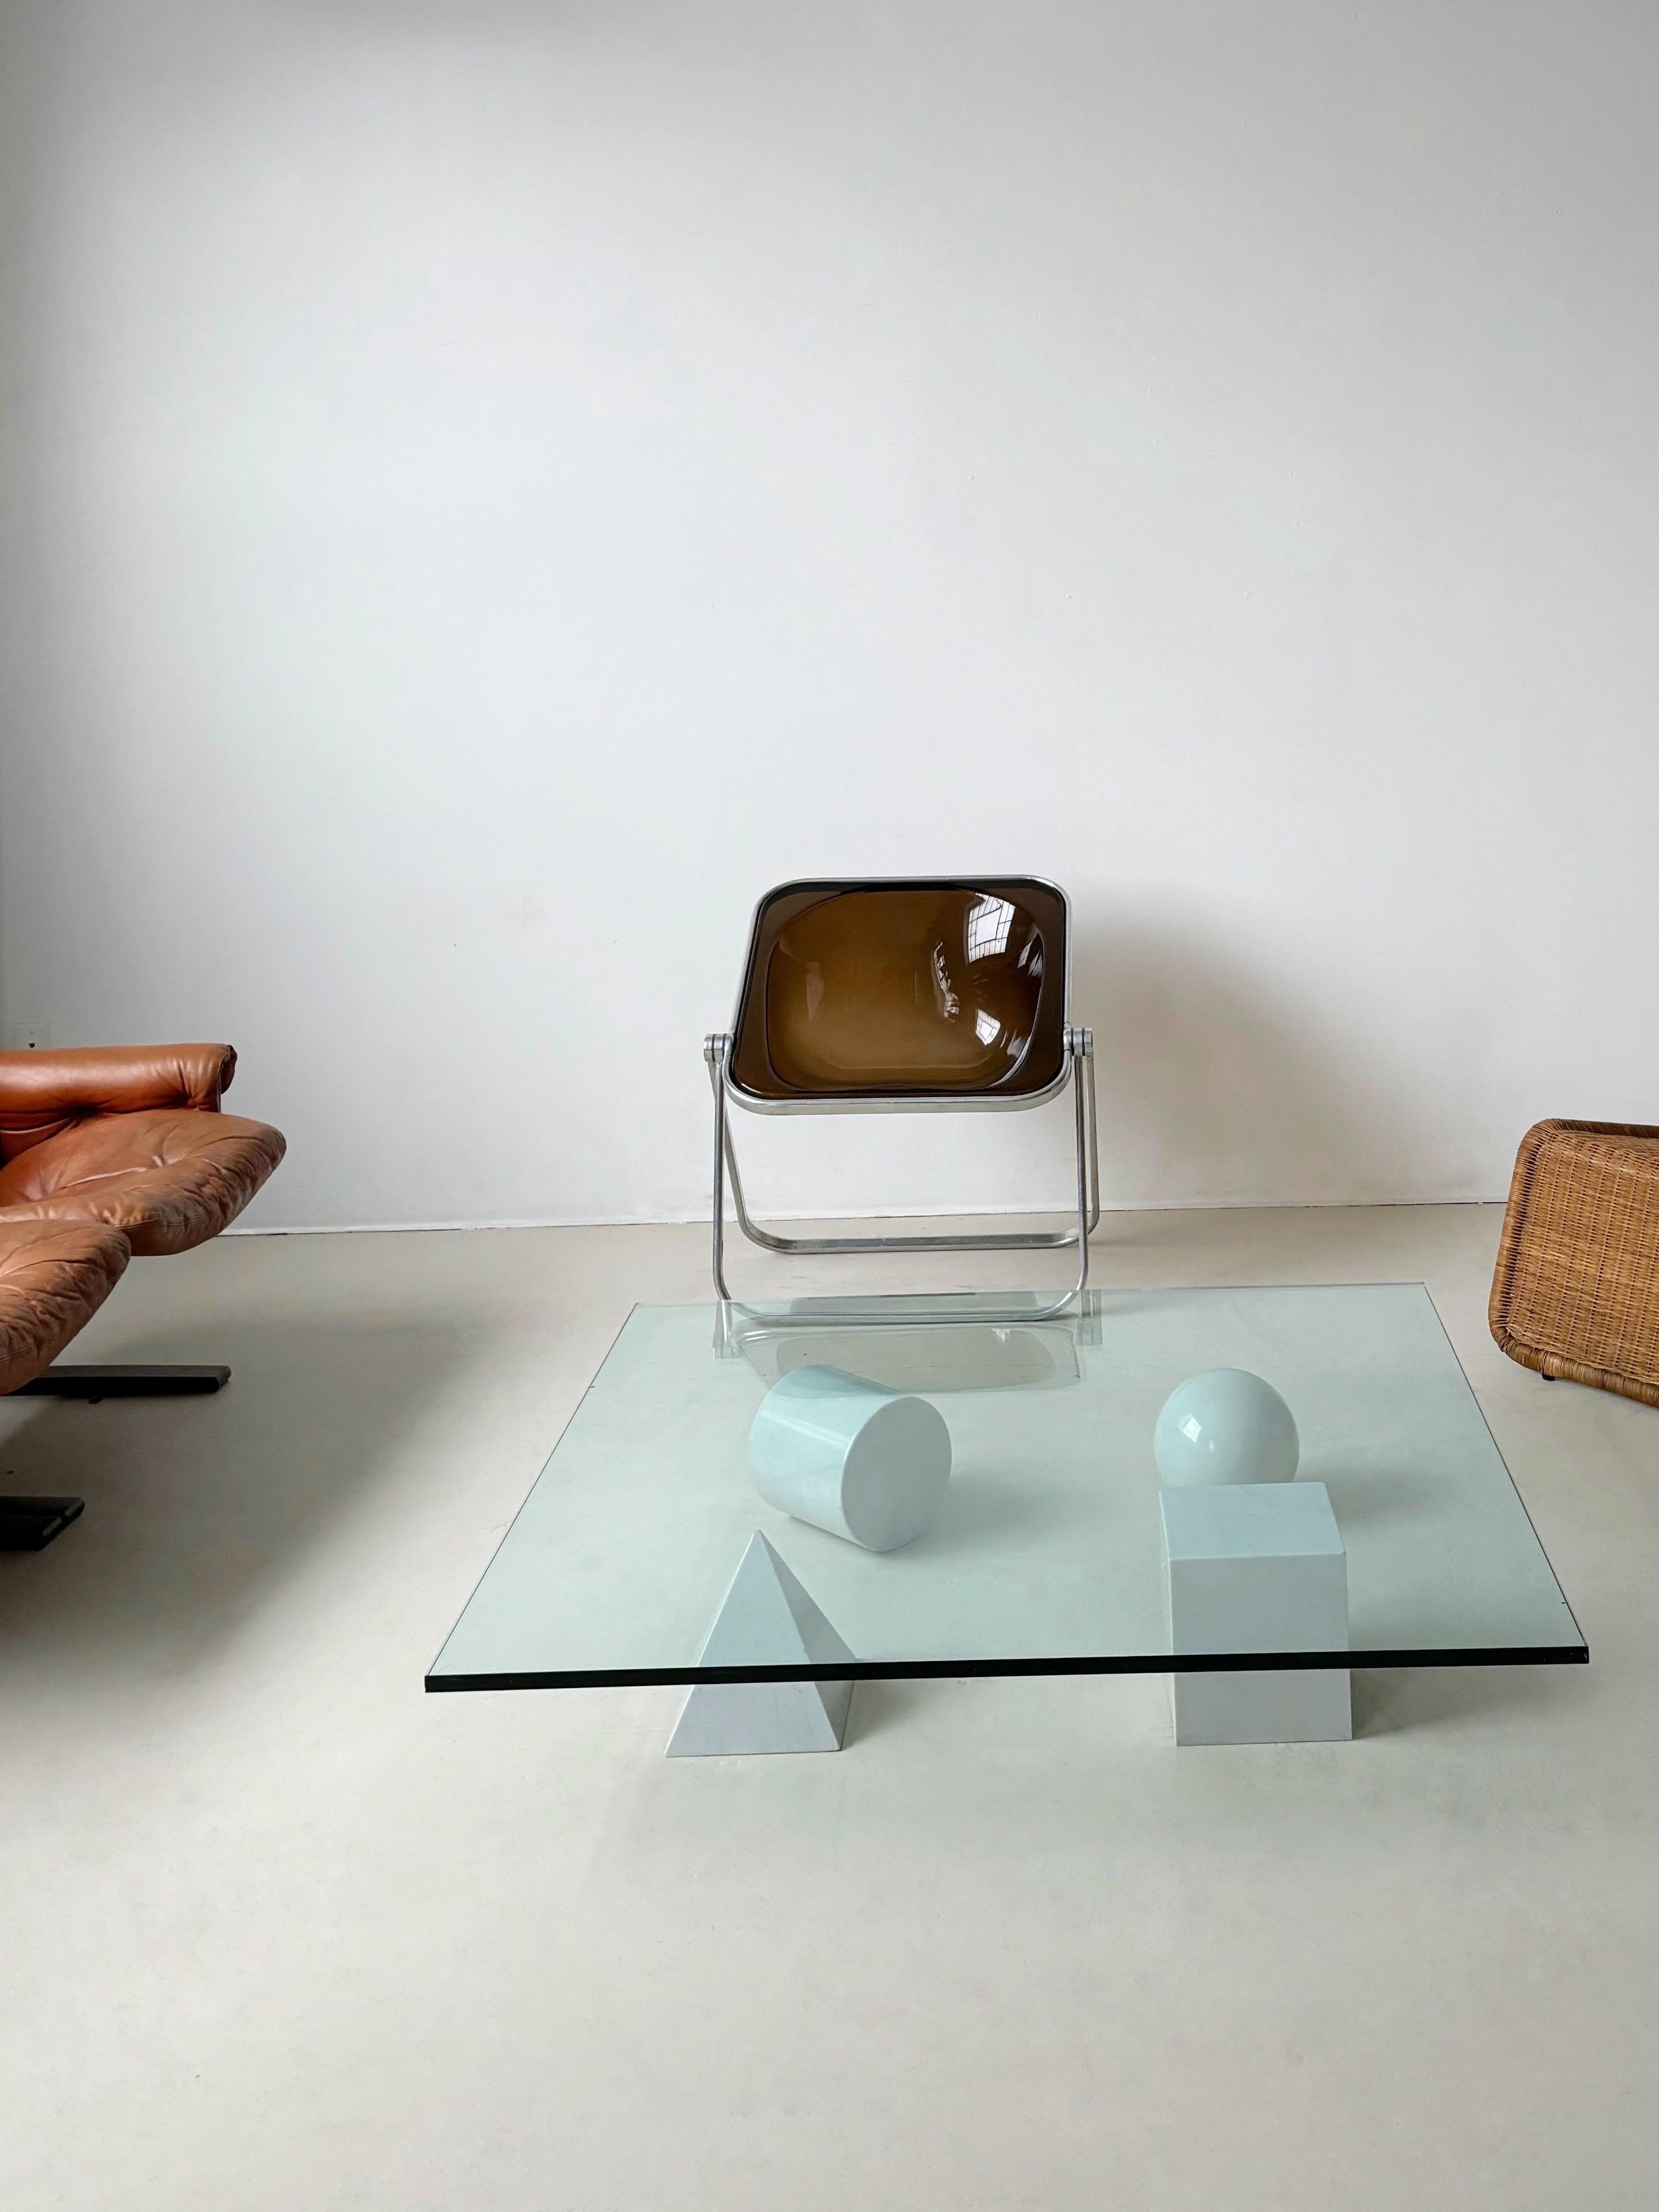 Metafora coffee table in Carrara white marble by Lella and Massimo Vignelli for Casigliani, 1979

The four forms of the Euclidean geometry, the Cube, the Cylinder, the Sphere and the Pyramid, made of four marbles, represent the basis of the table